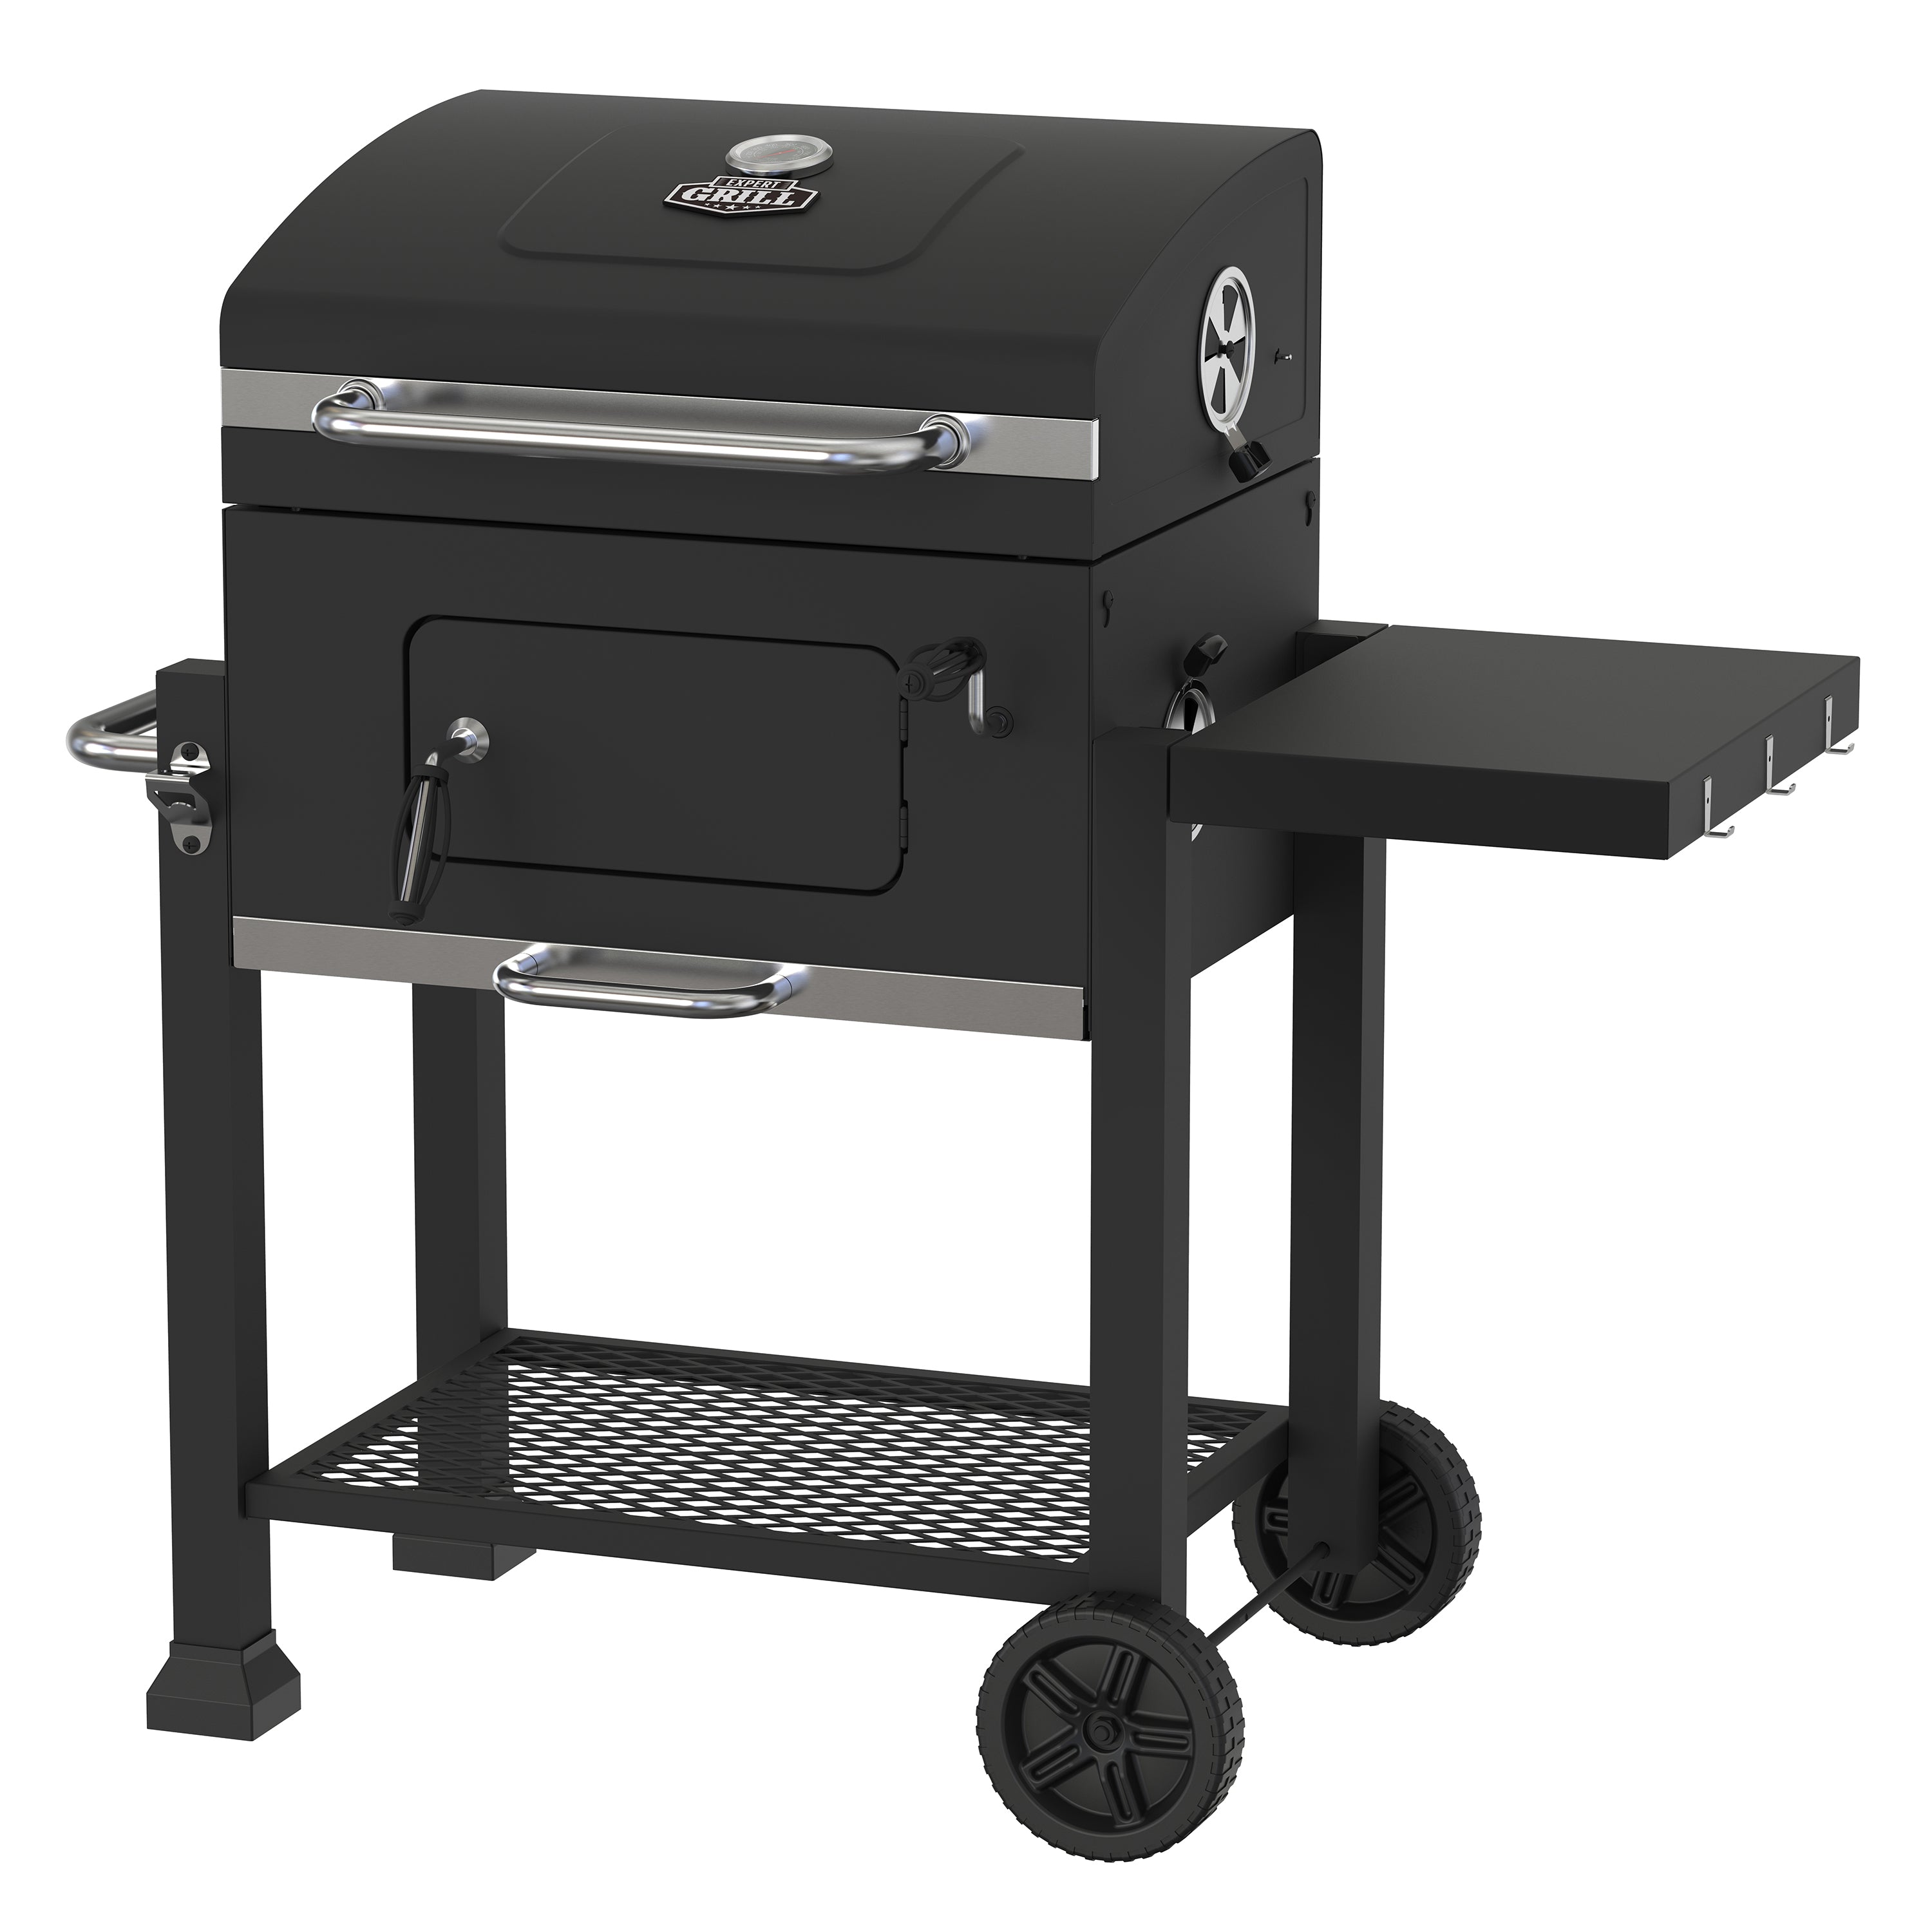 Heavy Duty 24-Inch Charcoal Grill BBQ Barbecue Smoker Outdoor Pit Patio Cooker-Barbecue & Grill-AULEY